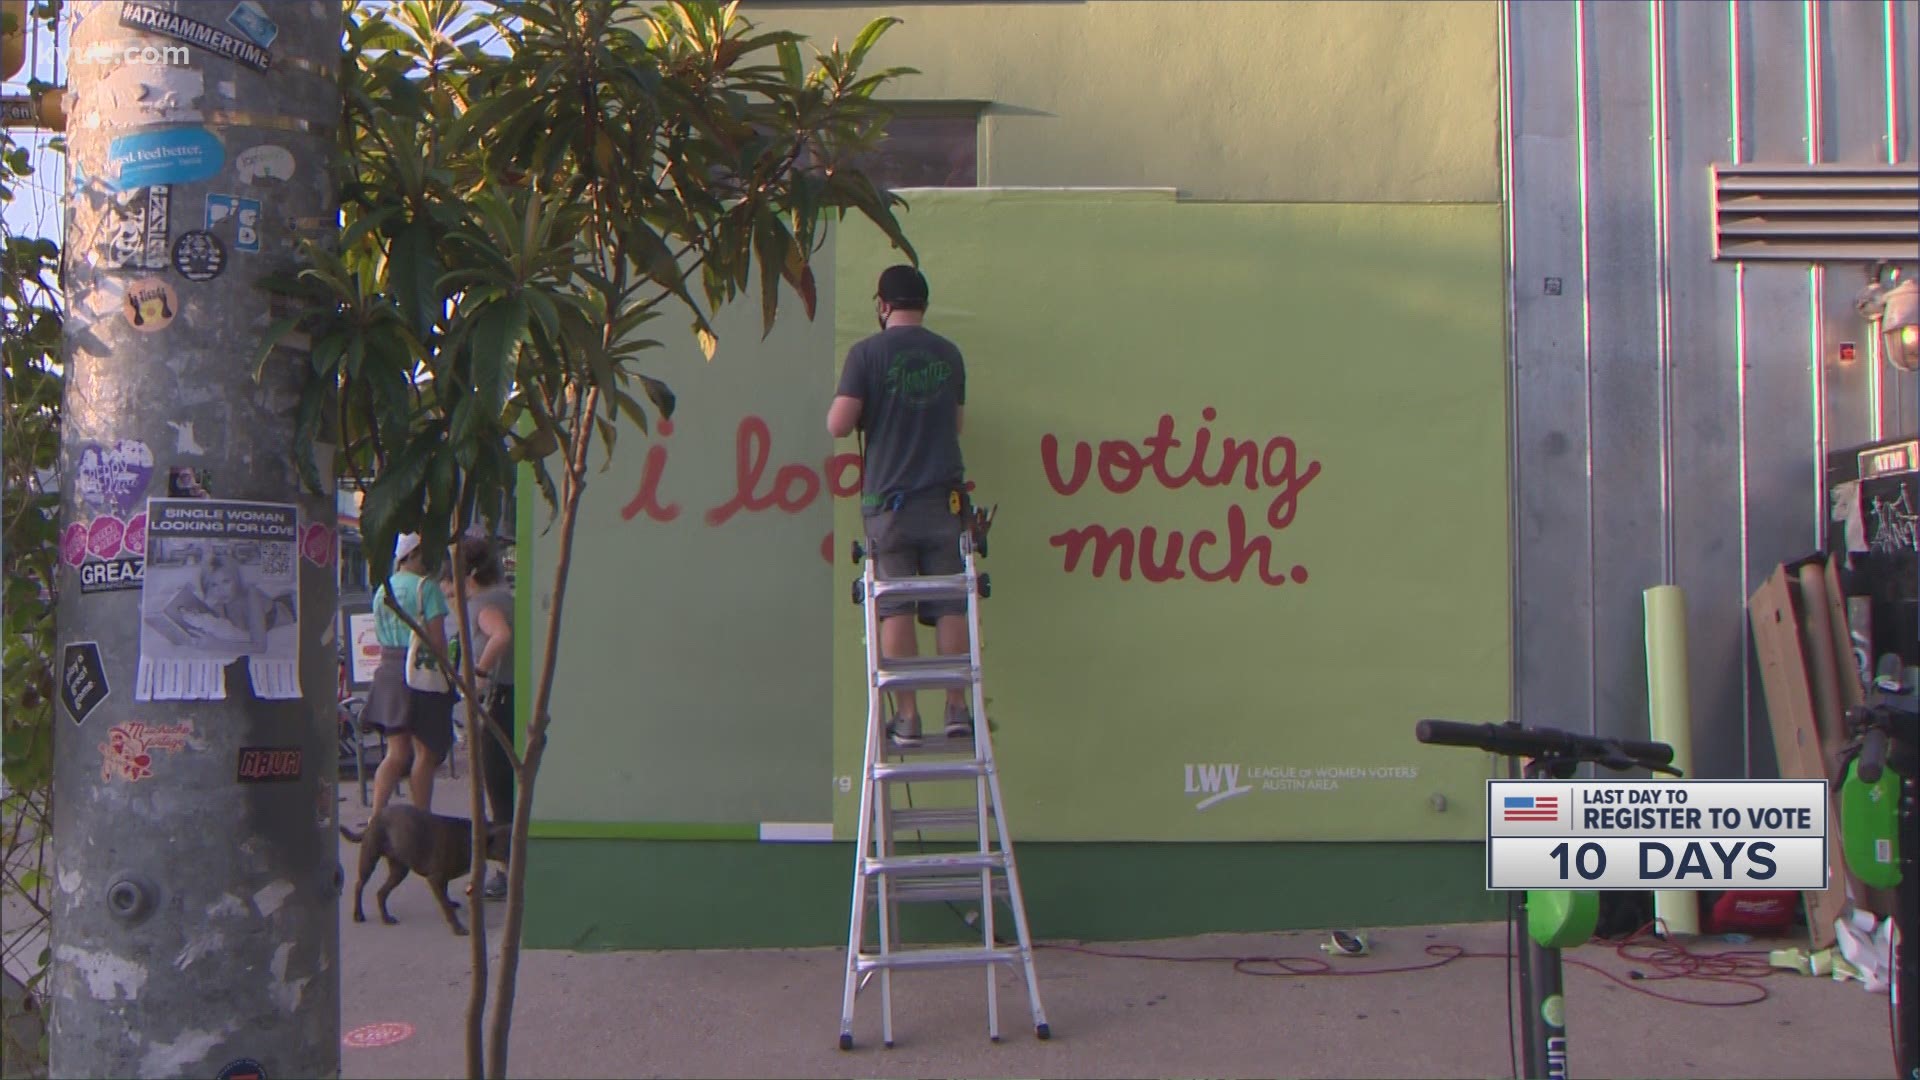 I Love Voting So Much Iconic Austin Mural Gets Political Kvue Com